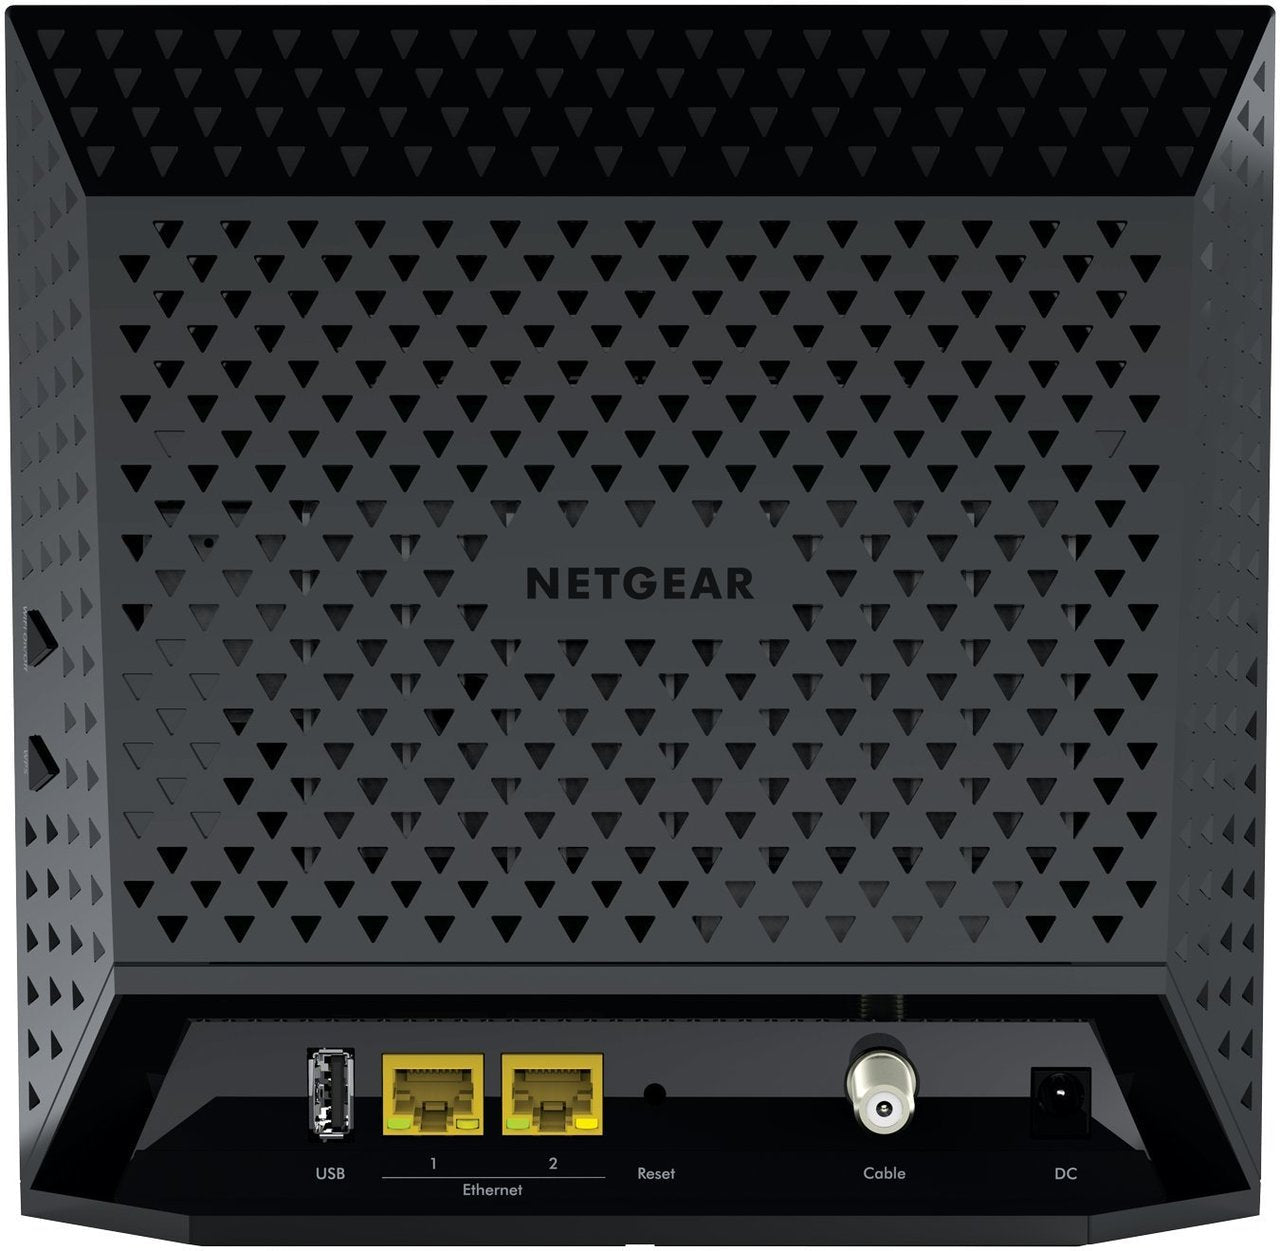 NETGEAR C6250-100NAR AC1600 (16x4) WiFi Cable Router Combo - Certified Refurbished